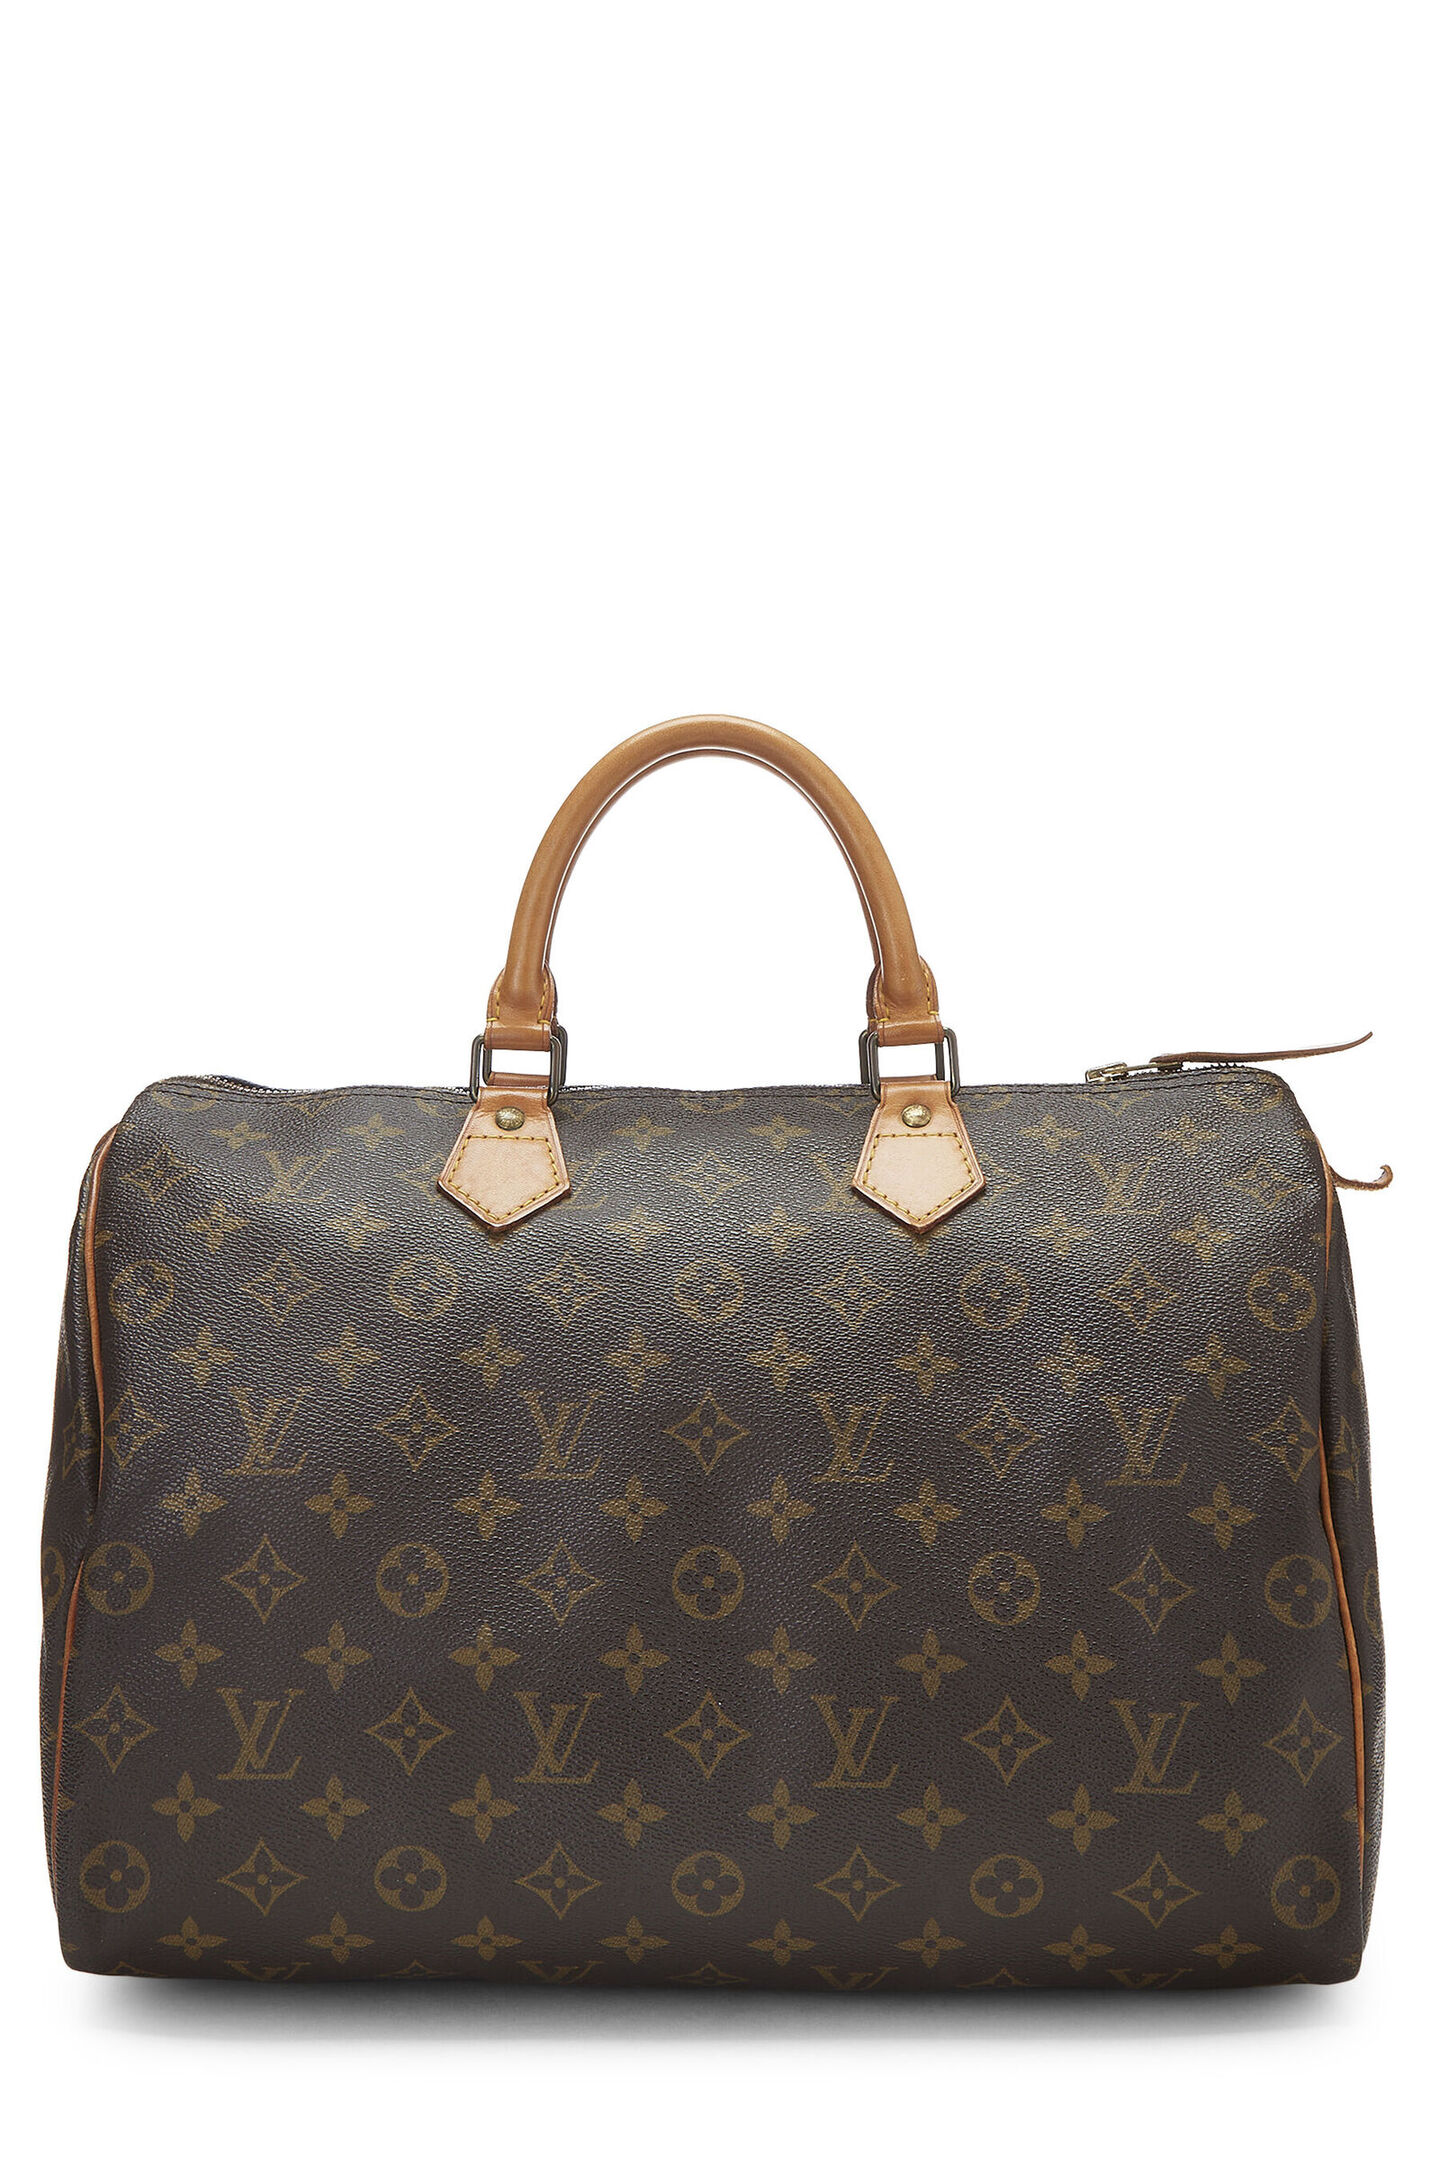 Chanel, Hermes, Louis Vuitton, Dior Sports Equipment Up For